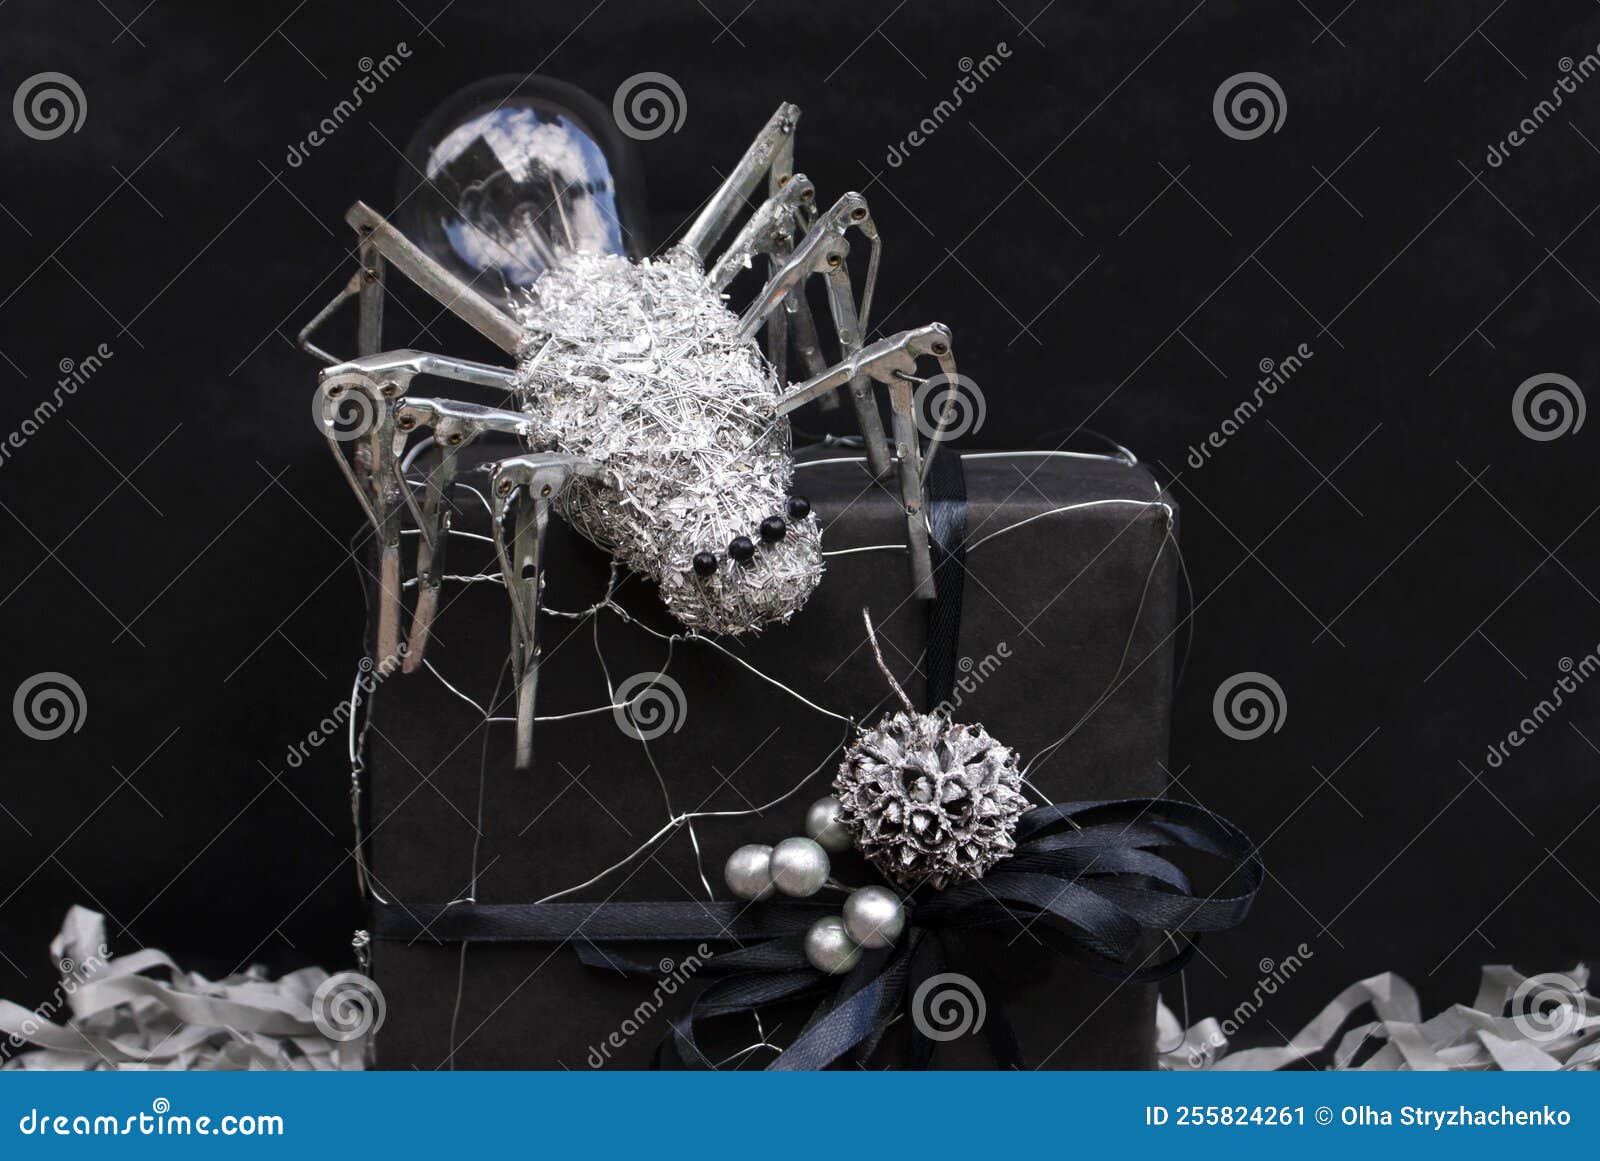 This Metal Spider is Made with a Light Bulb, Umbrella Needles